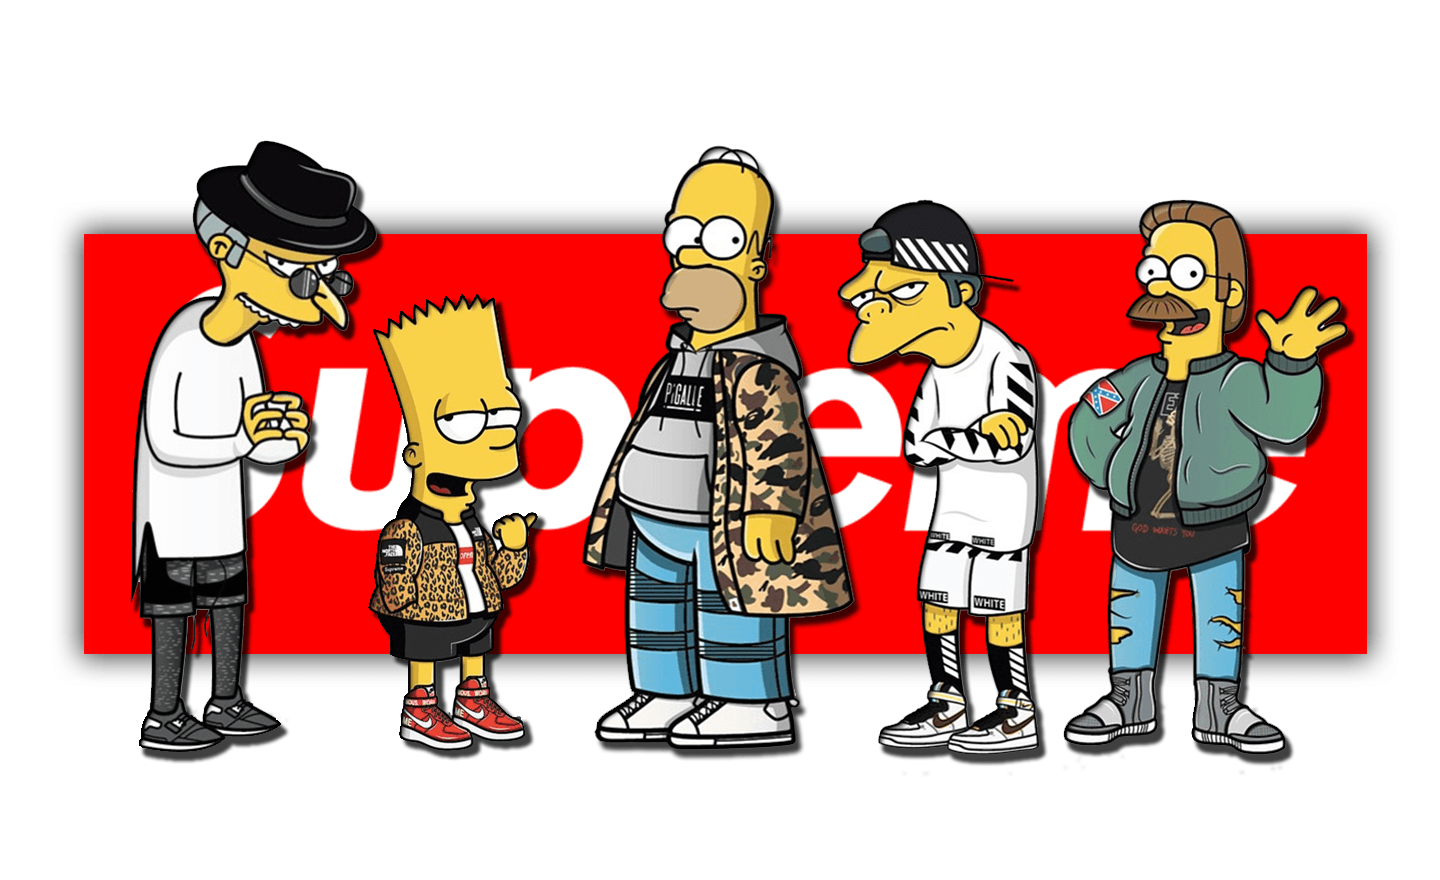 Supreme Cool Wallpapers - Wallpaper Cave